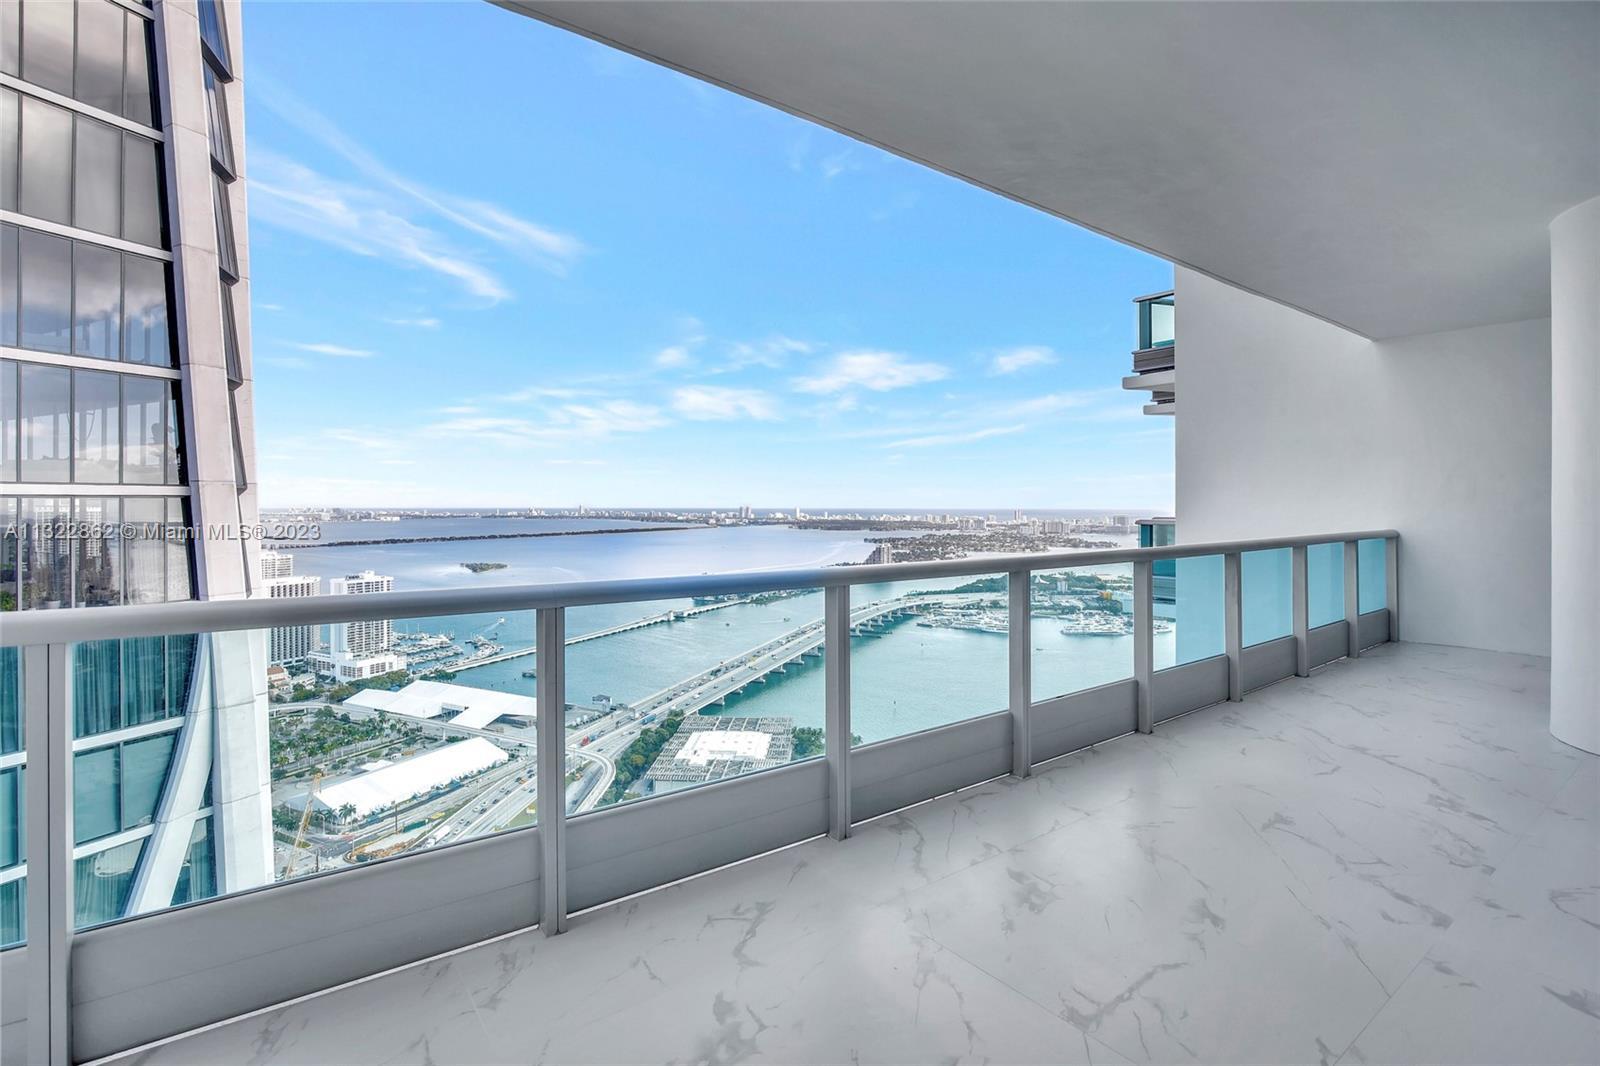 Live in the sky in this spectacular 2 bedroom, 3 full bathroom condo at 900 Biscayne. Enjoy entering